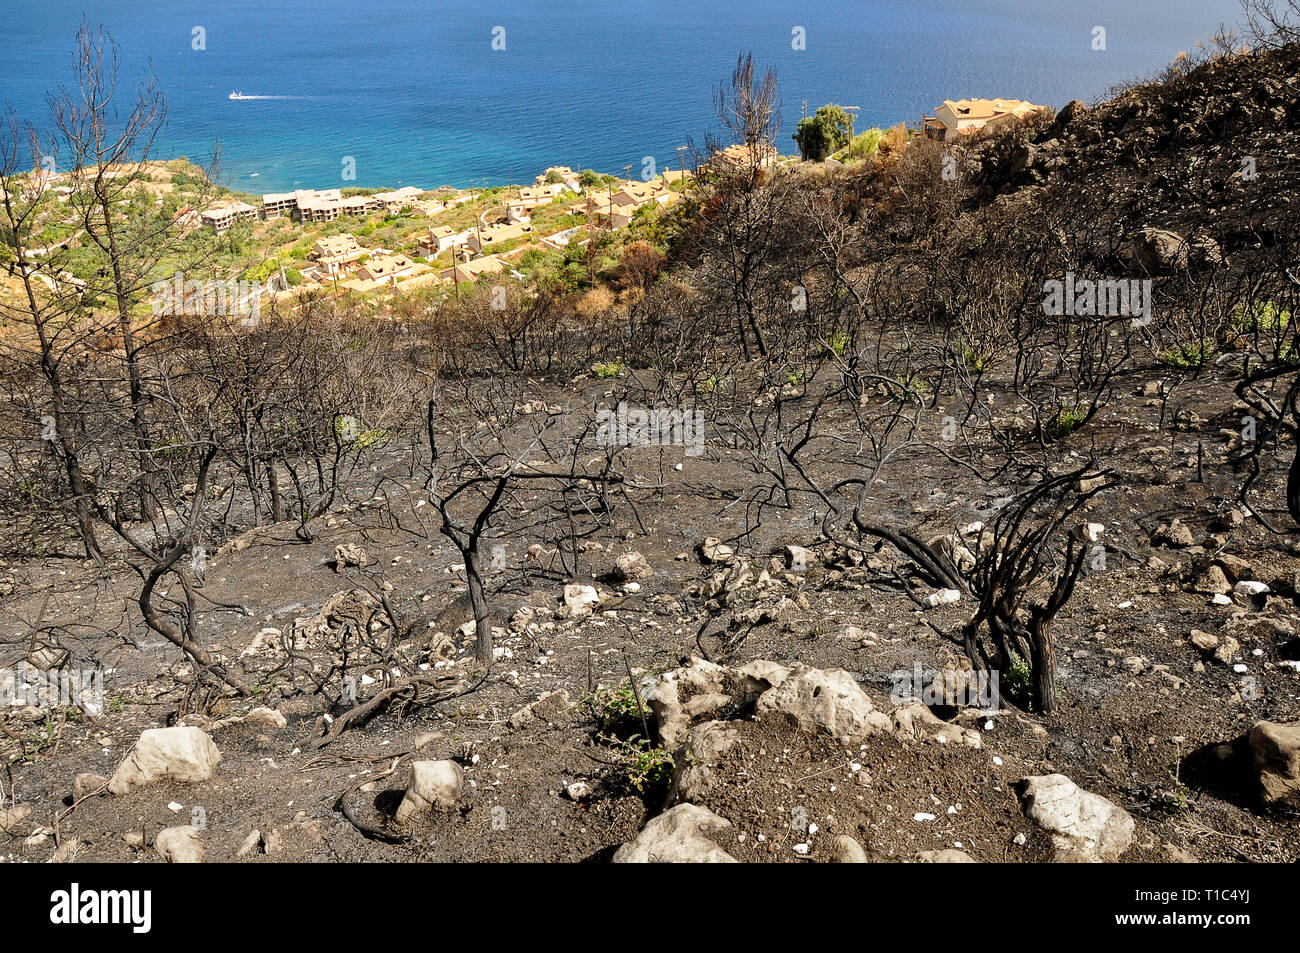 View of the black burned trees after disastrous forest fire on a hill. Mediterranean landscape in Greece after wildfire. Stock Photo